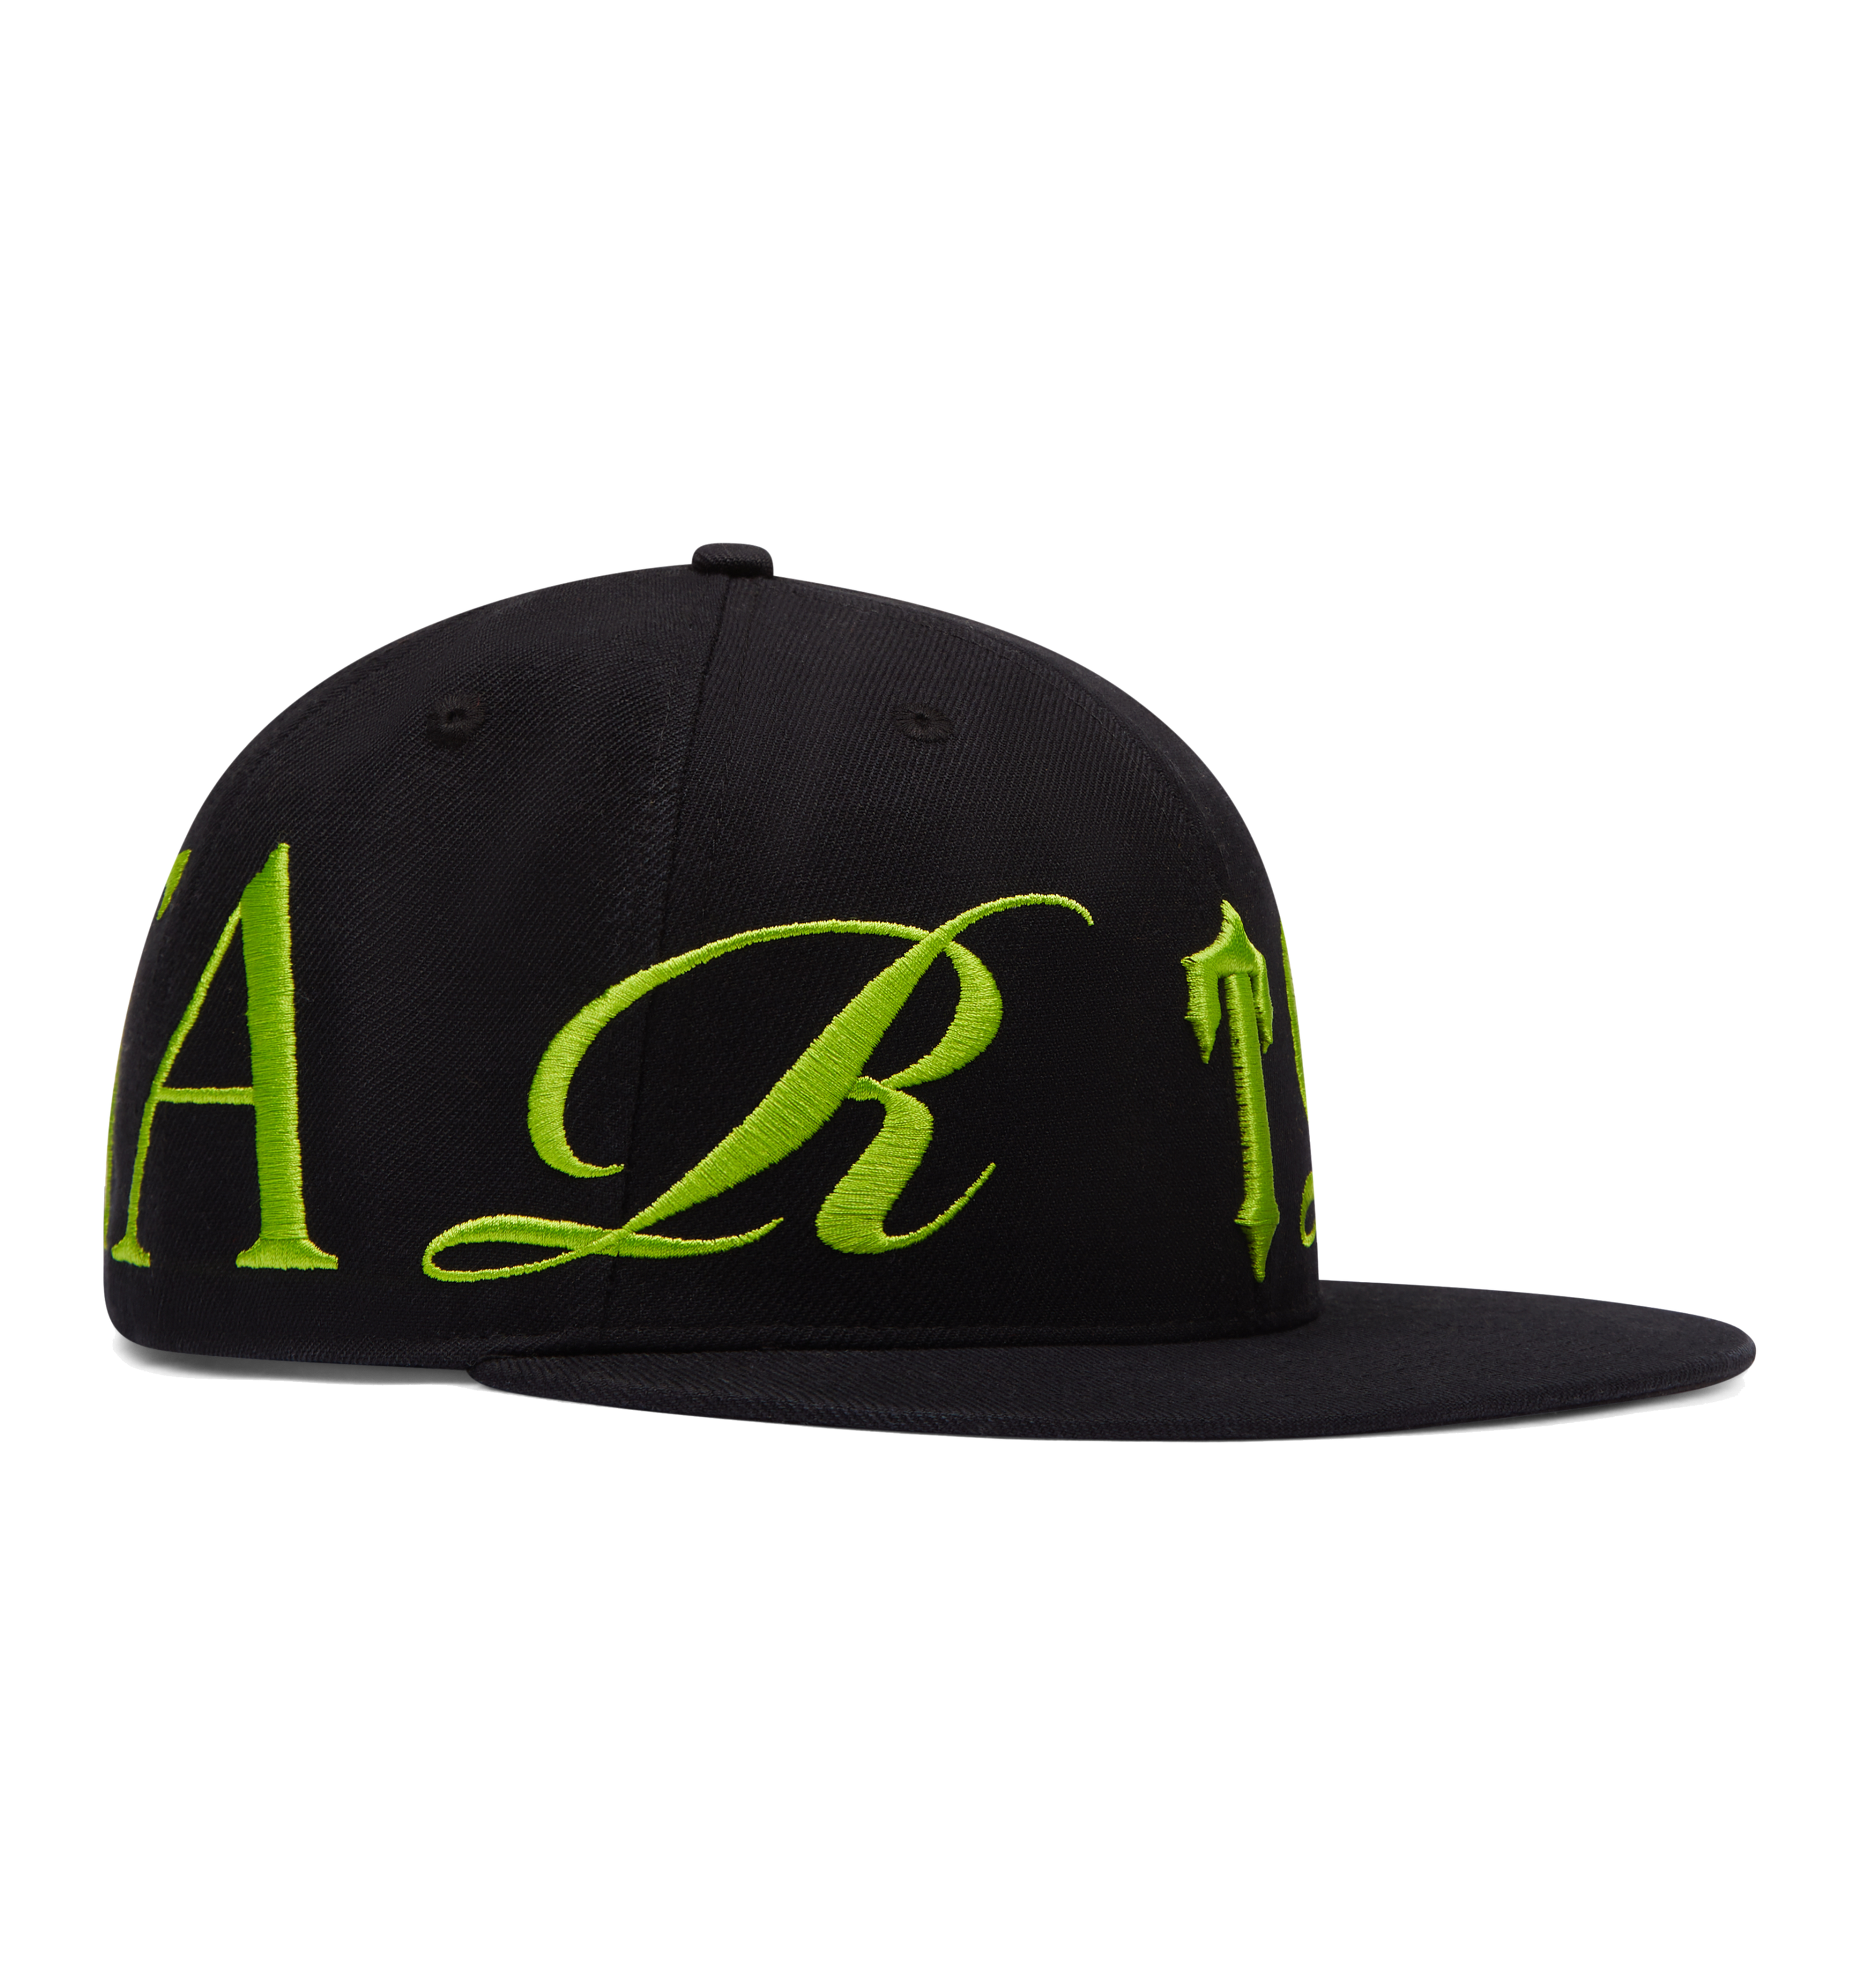 Script Fitted - Black/Lime